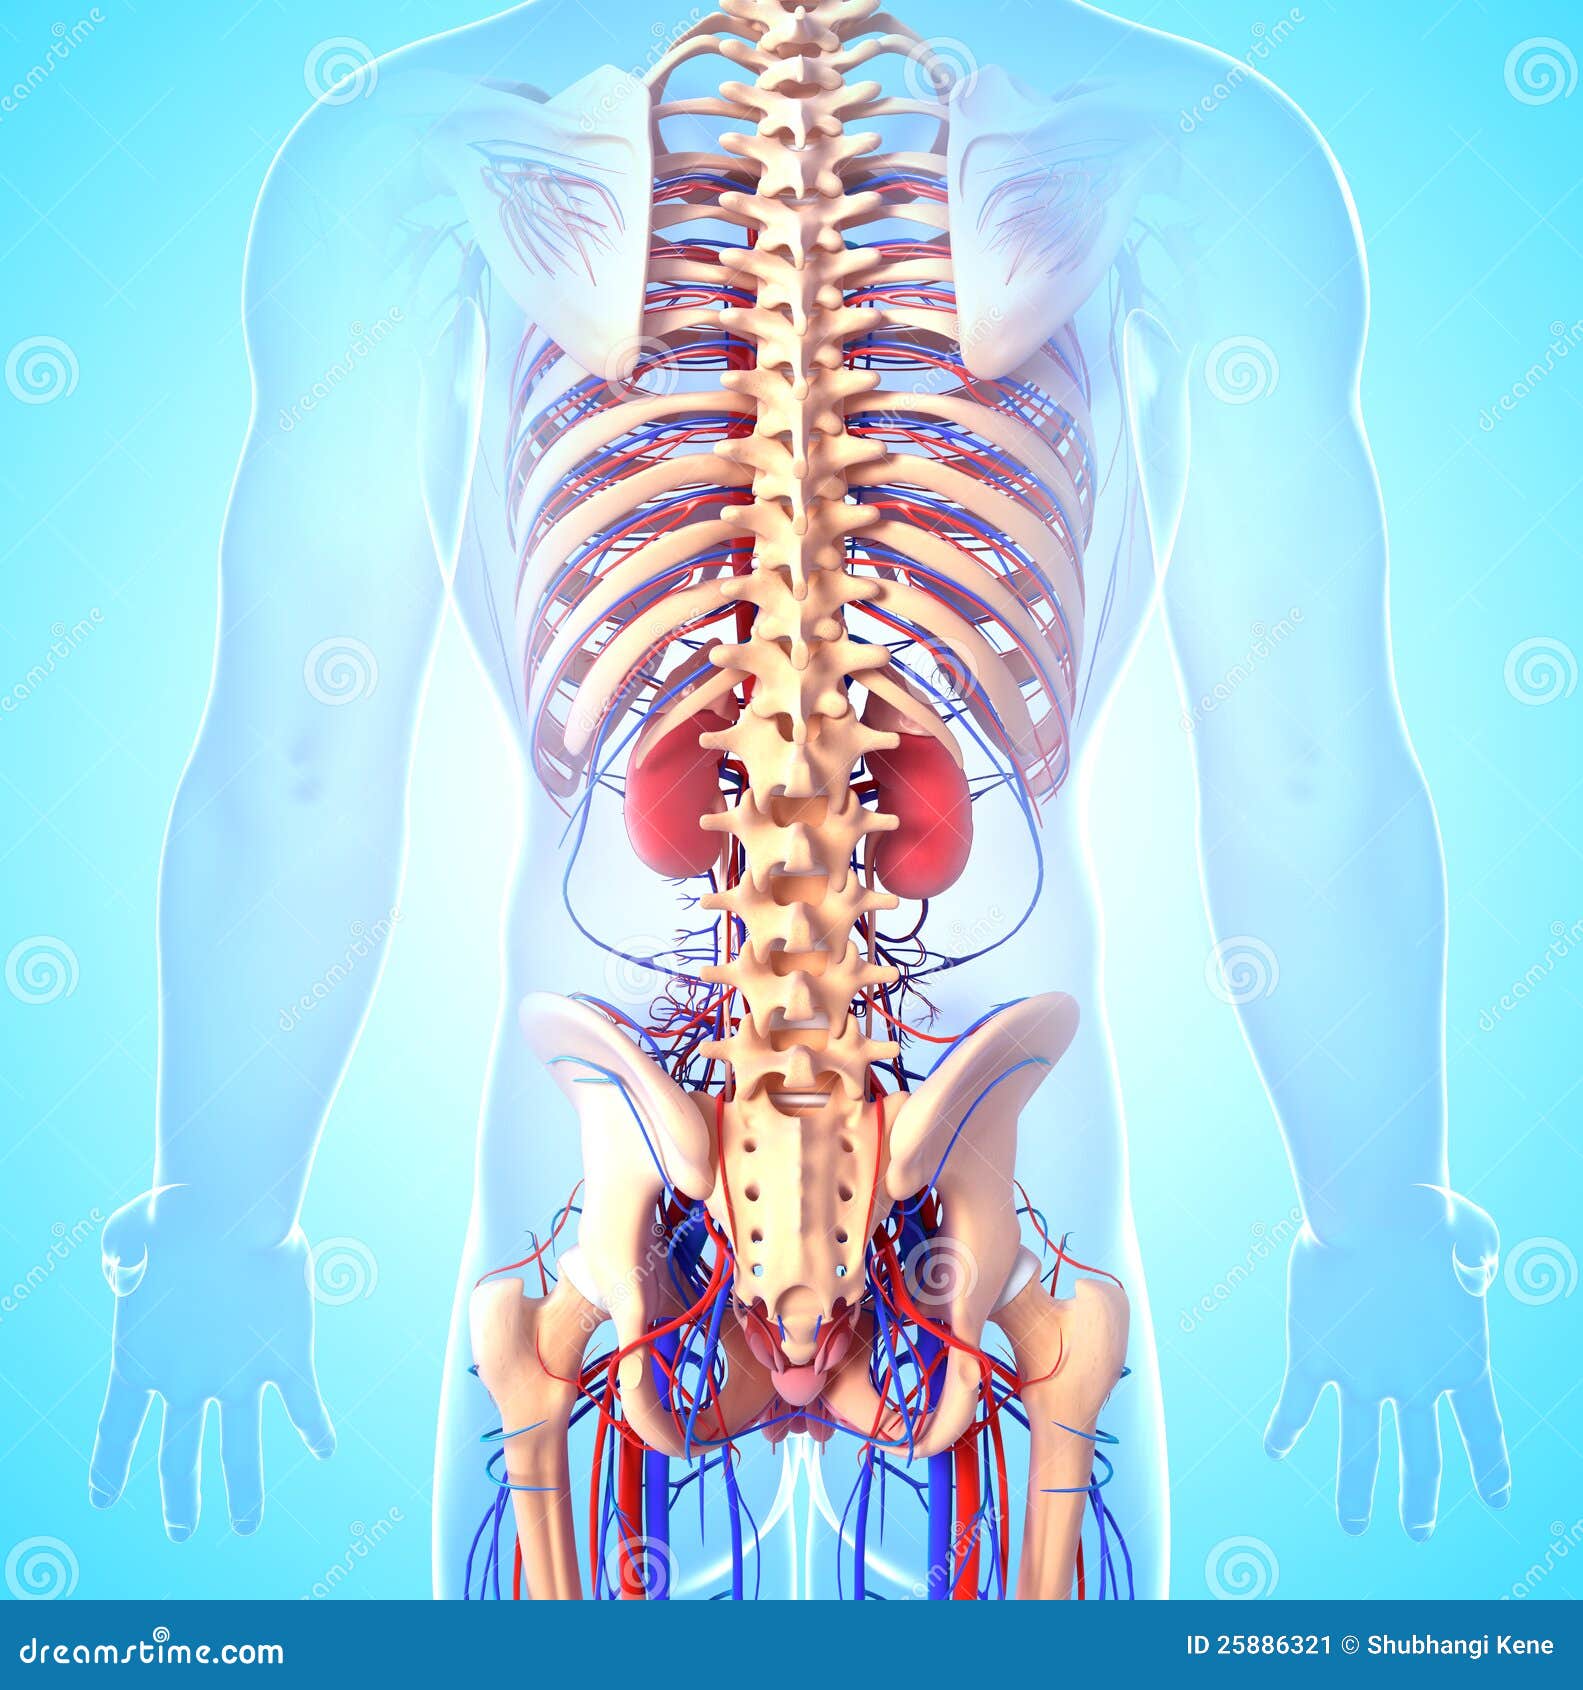 Back Side View Of Male Skeleton With Kidneys Stock Image - Image: 25886321